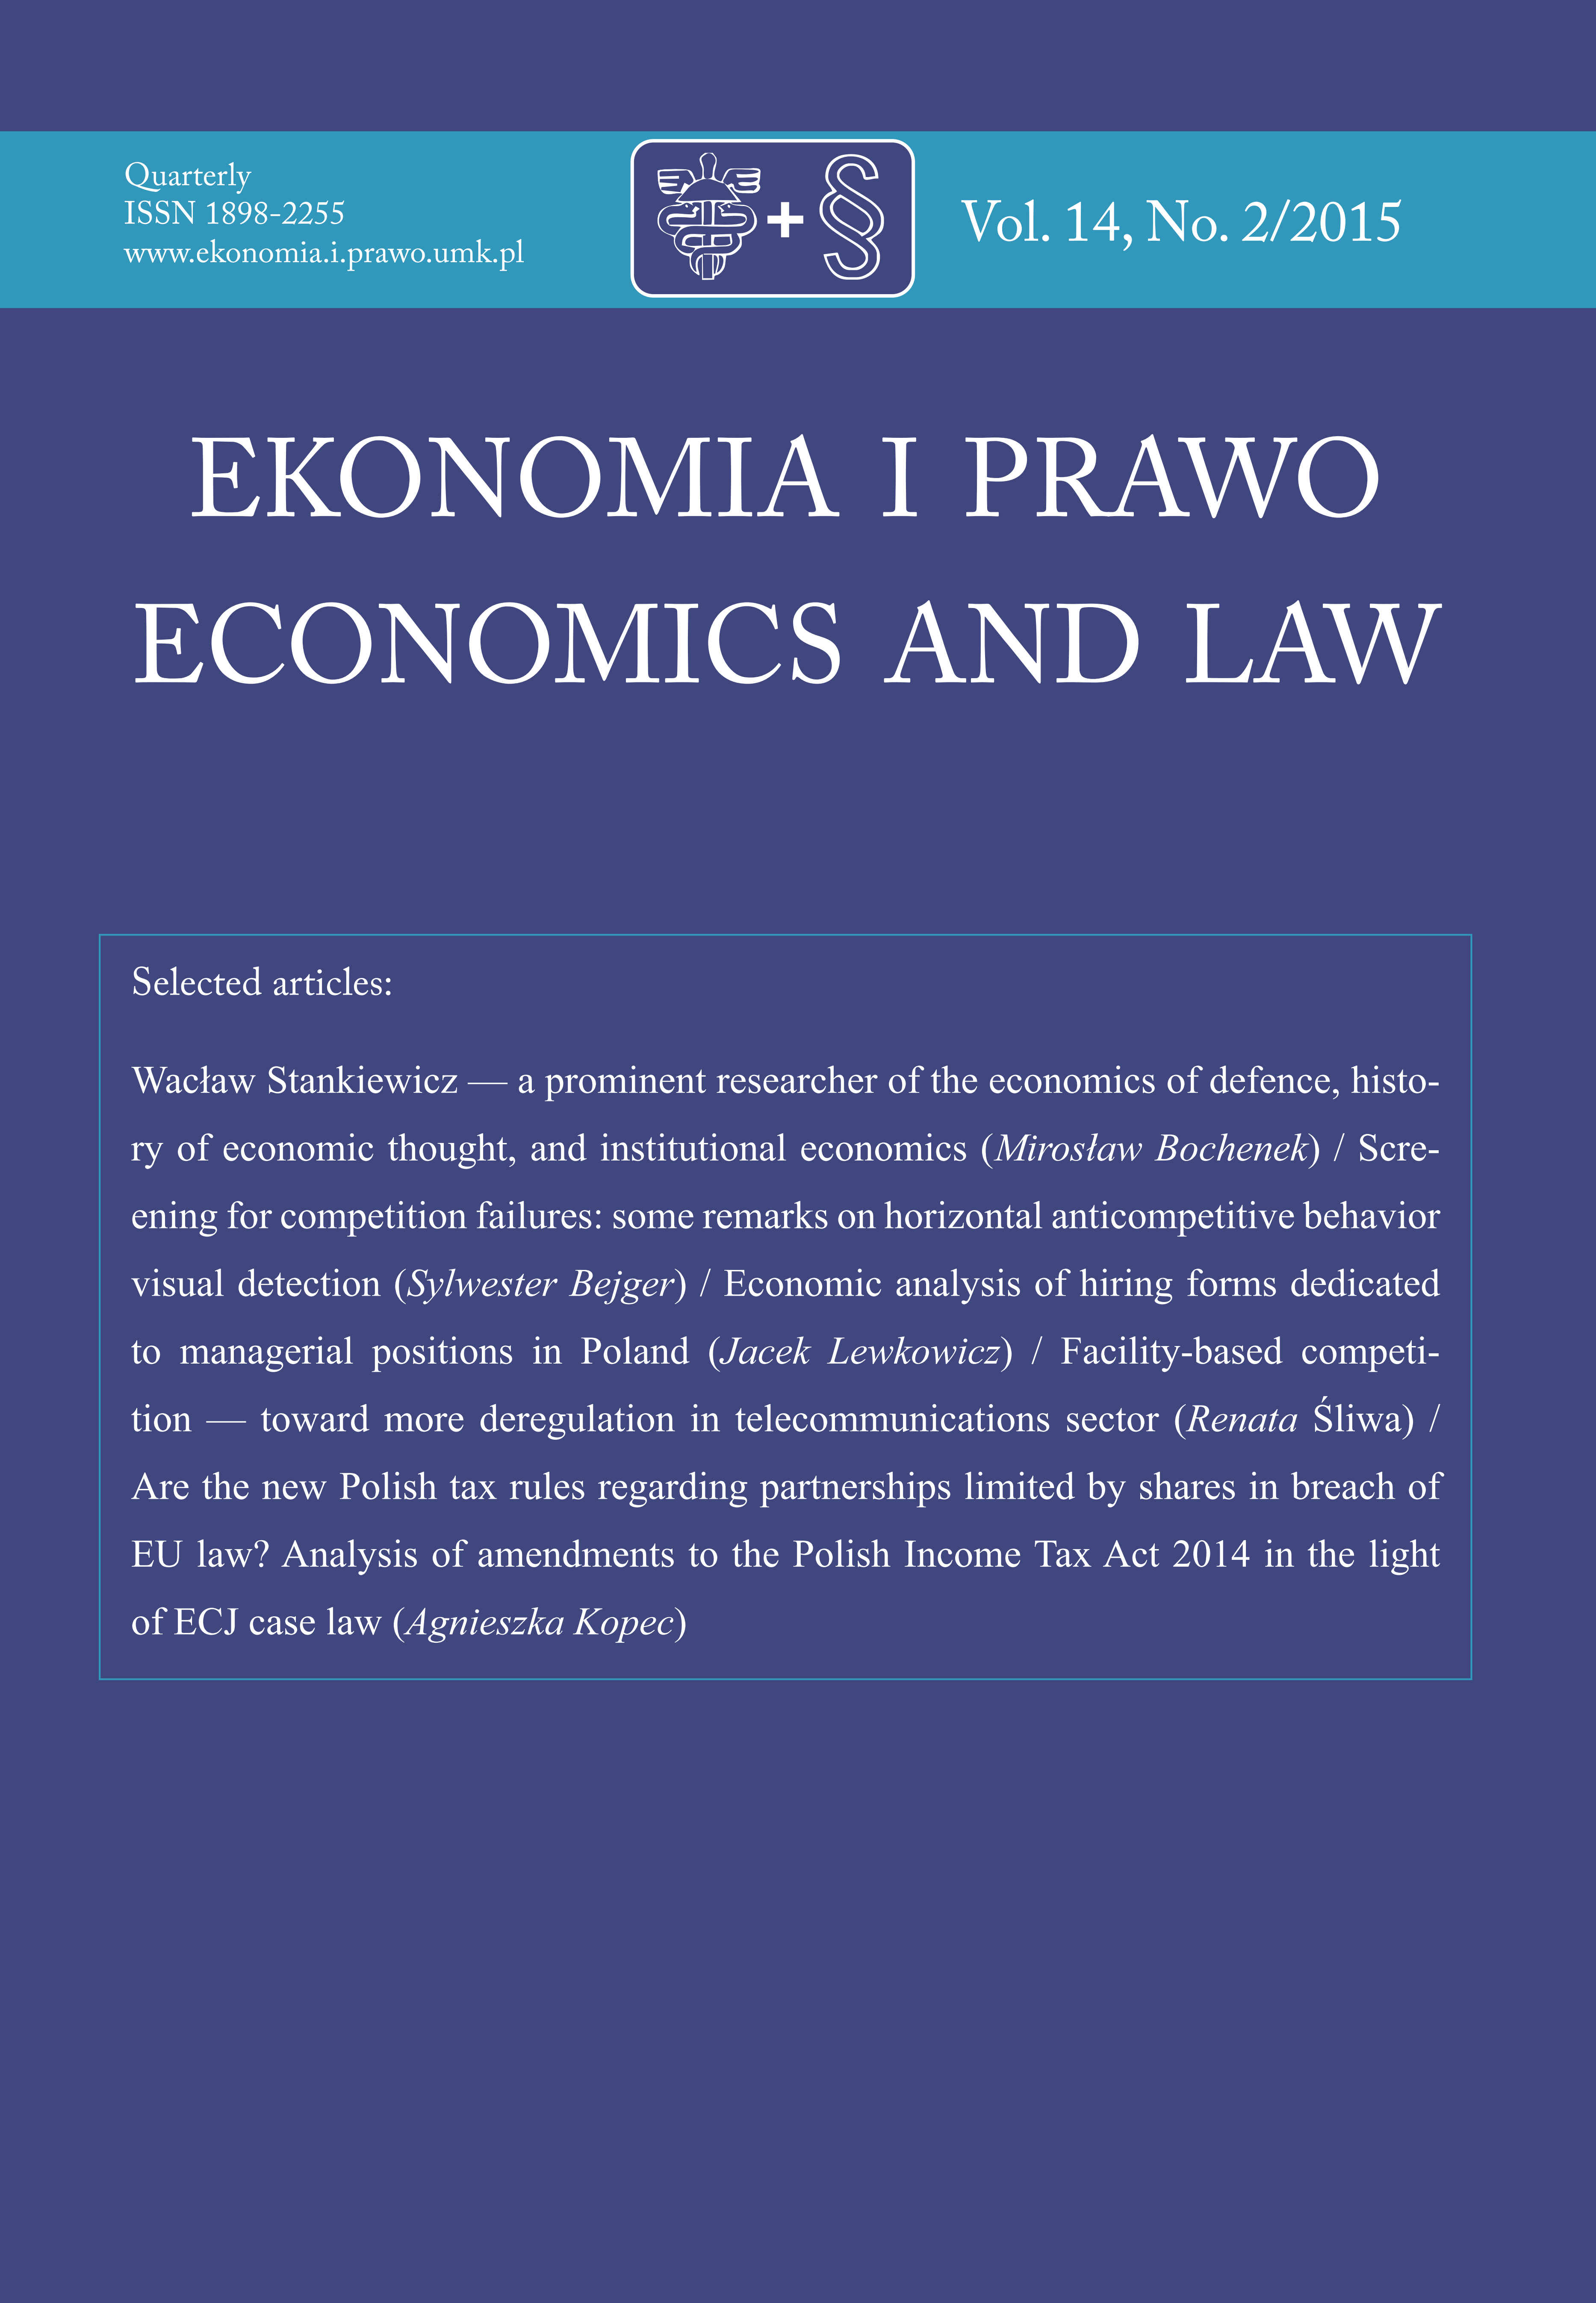 ECONOMIC ANALYSIS OF HIRING FORMS DEDICATED TO MANAGERIAL POSITIONS IN POLAND Cover Image